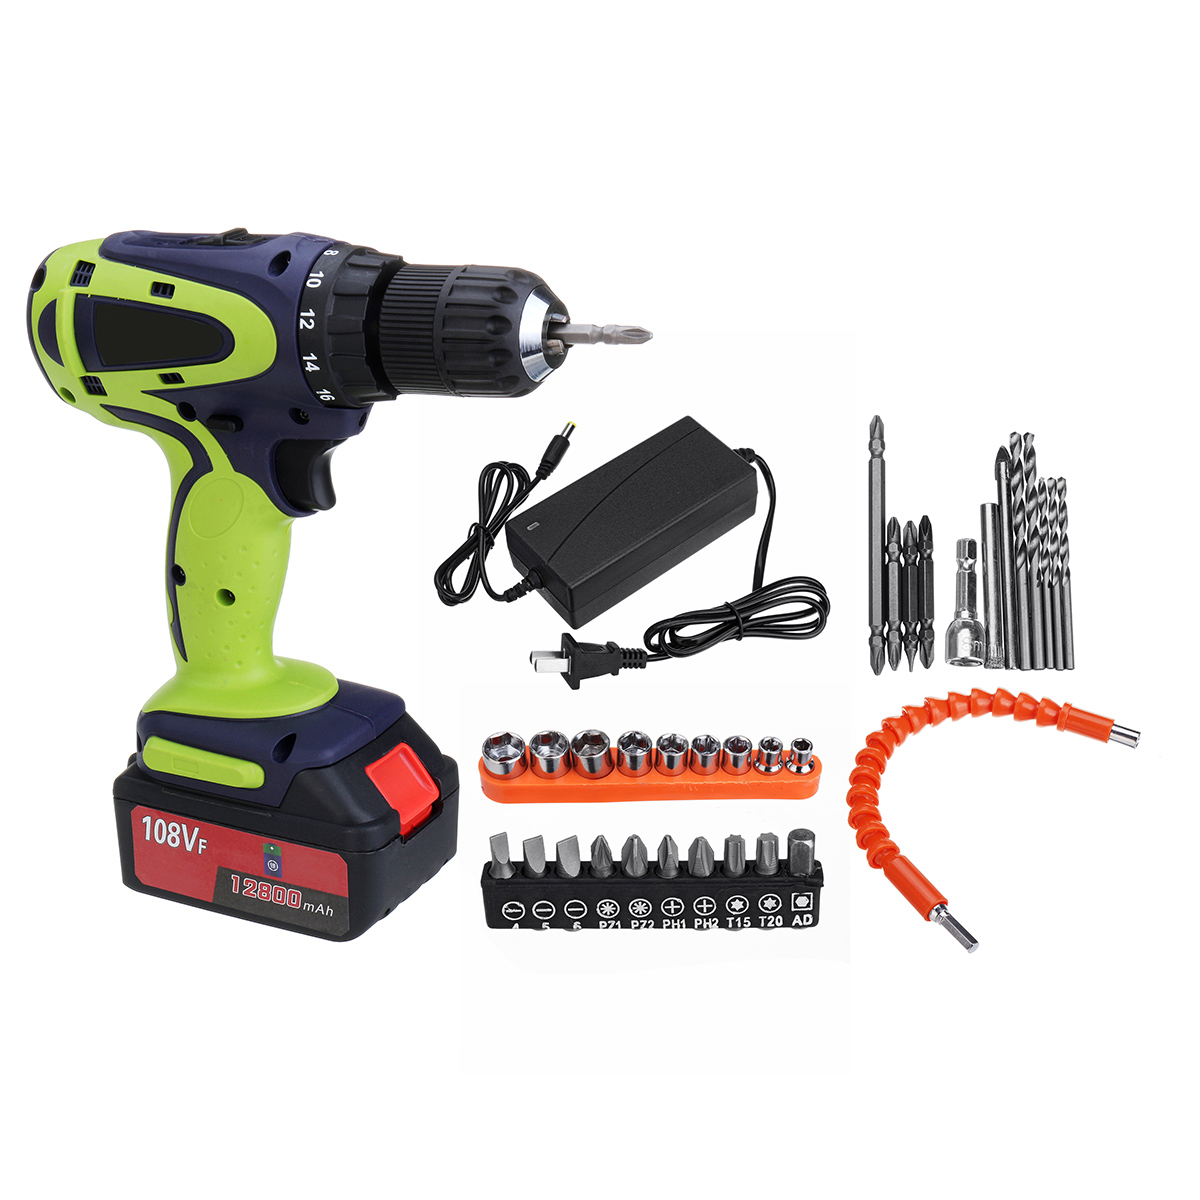 108VF-12800mAh-Dual-Speed-Cordless-Drill-Multifunctional-High-Power-Household-Electric-Drills-W-Acce-1457224-6